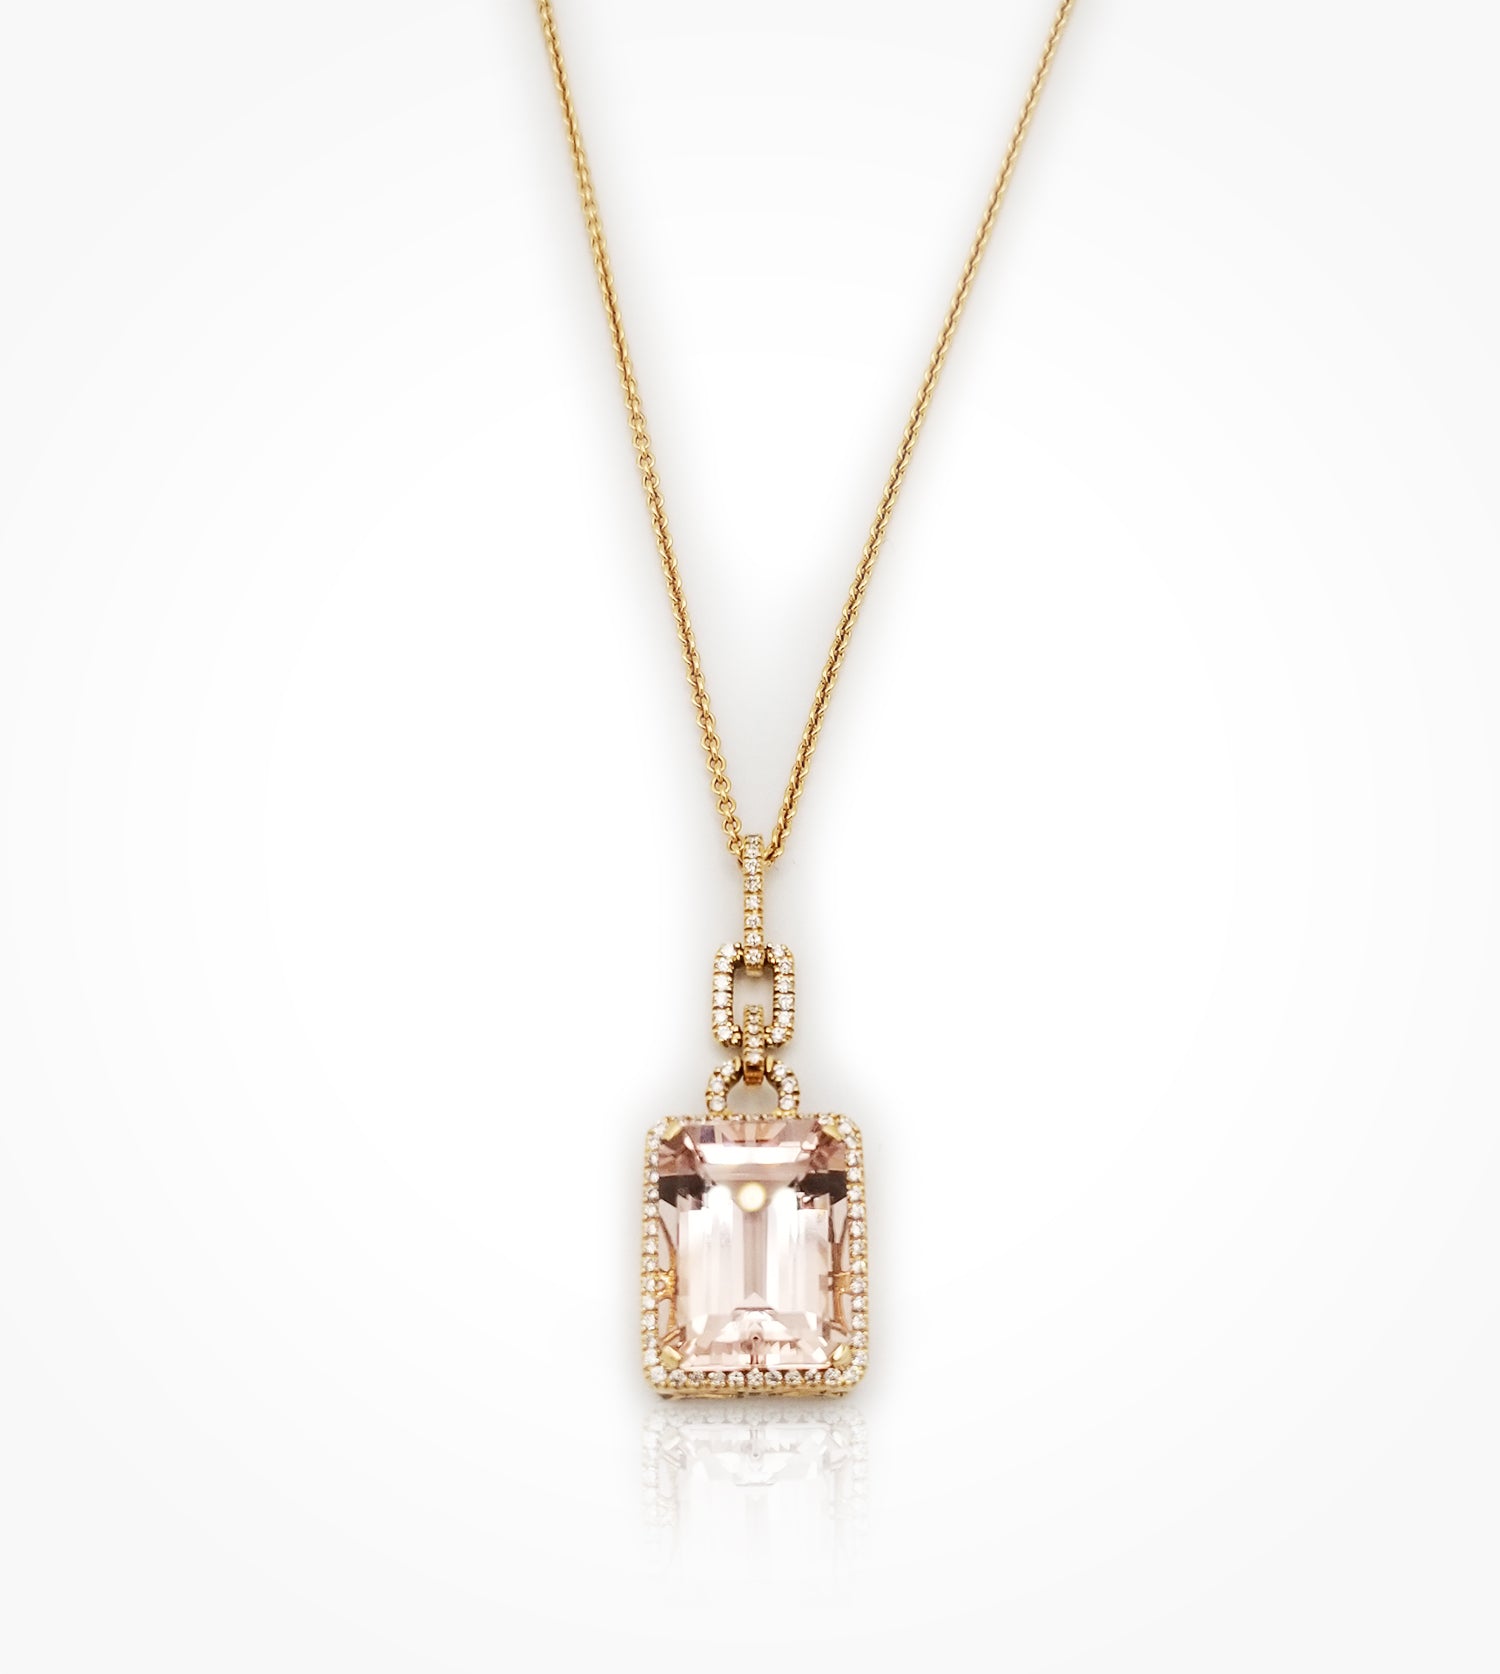 NE08188  18kt pink gold morganite and diamond necklace  SOLD